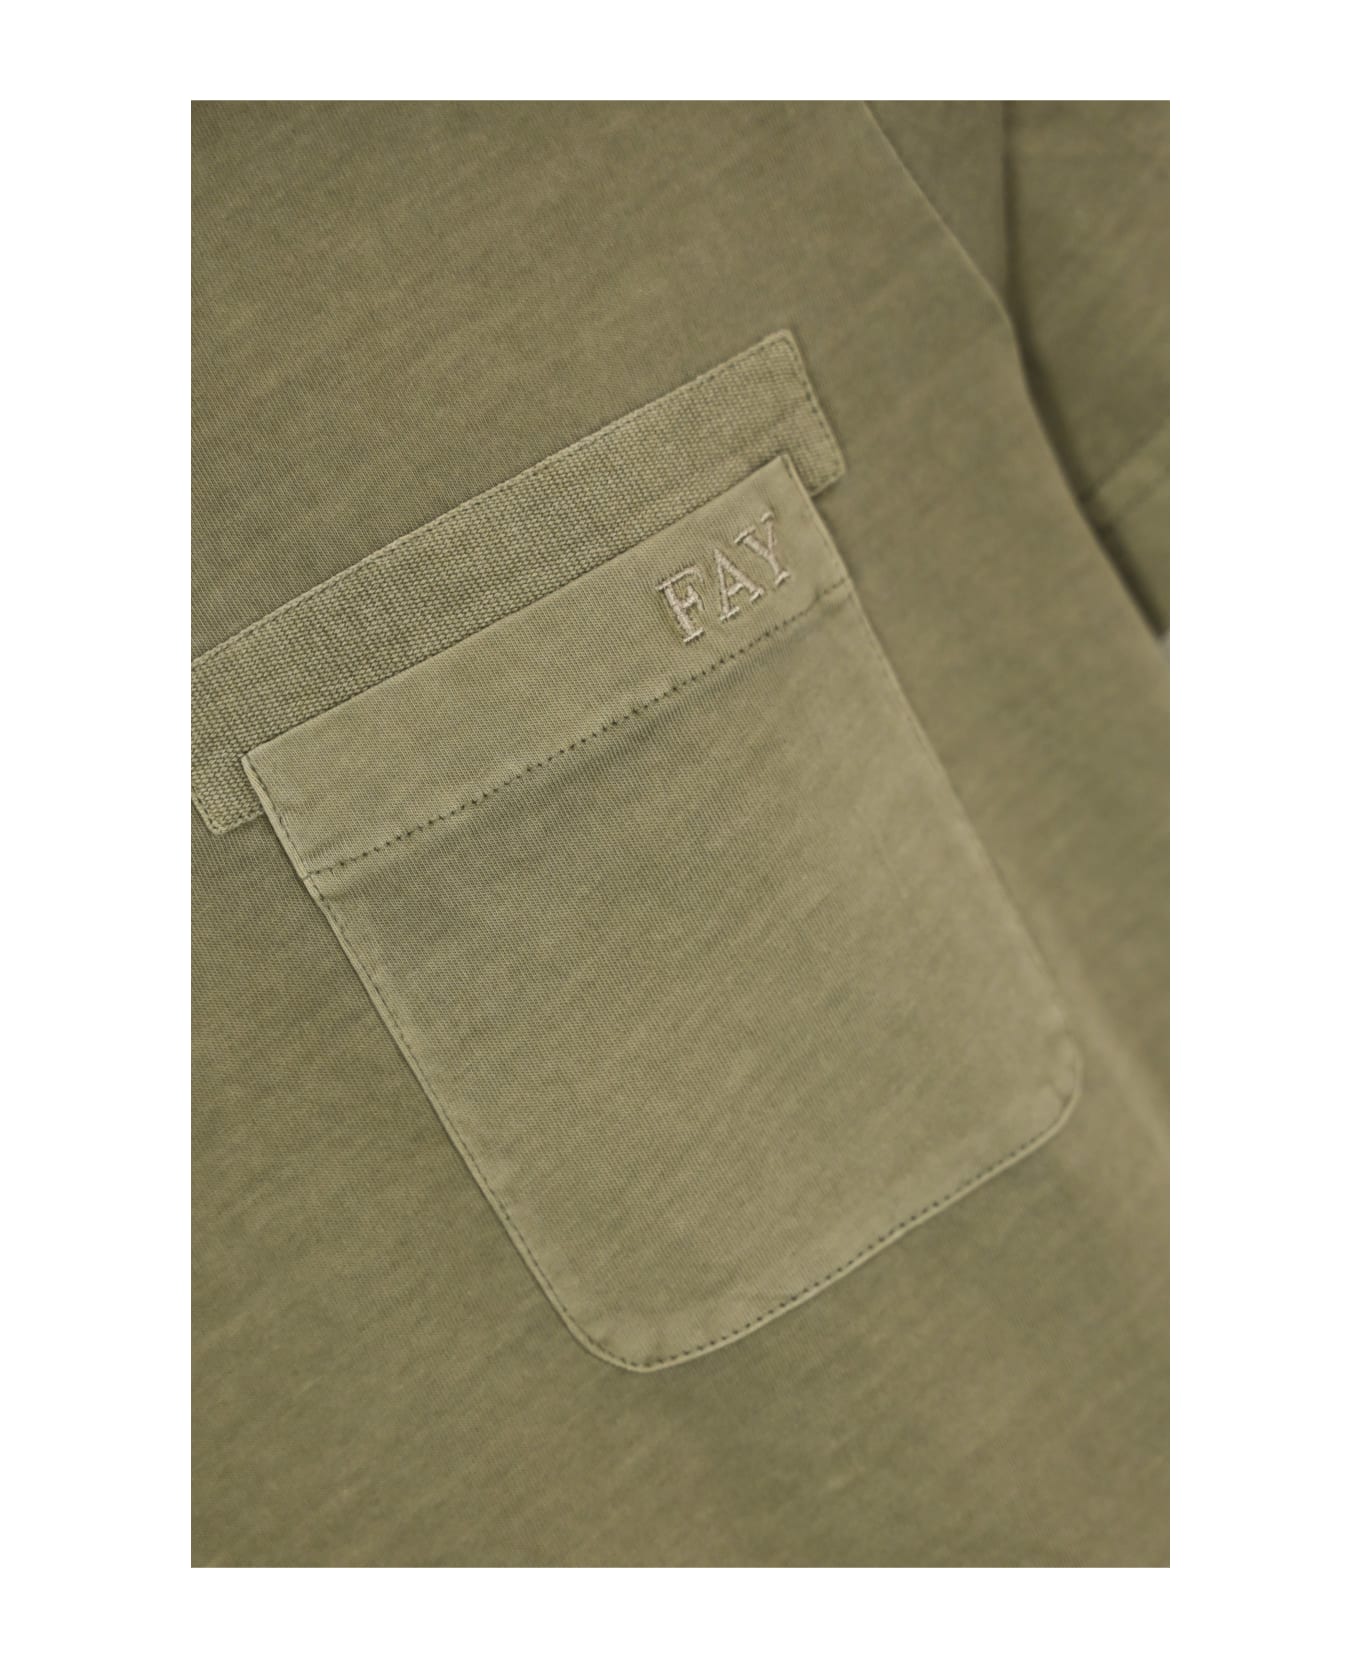 Fay T-shirt With Pocket - Verde シャツ